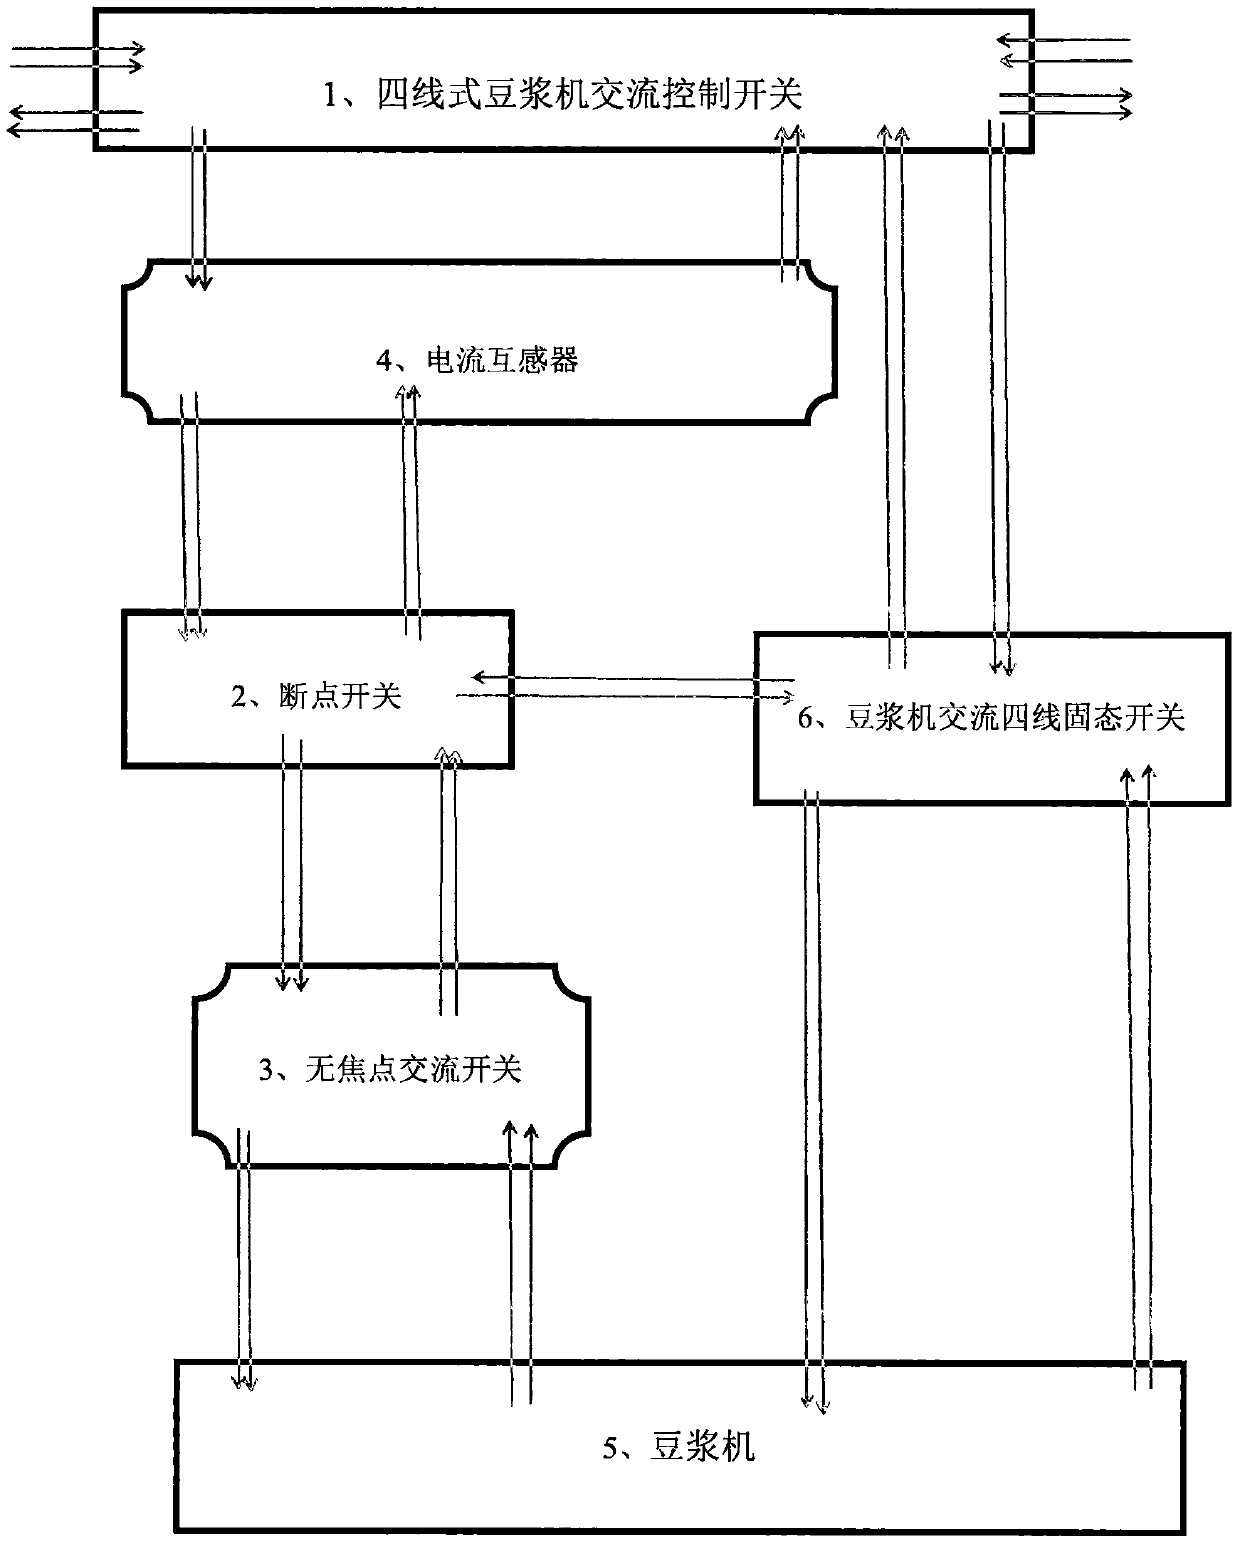 Device and technology for solving short circuit of soybean milk machine while maintaining normal operation